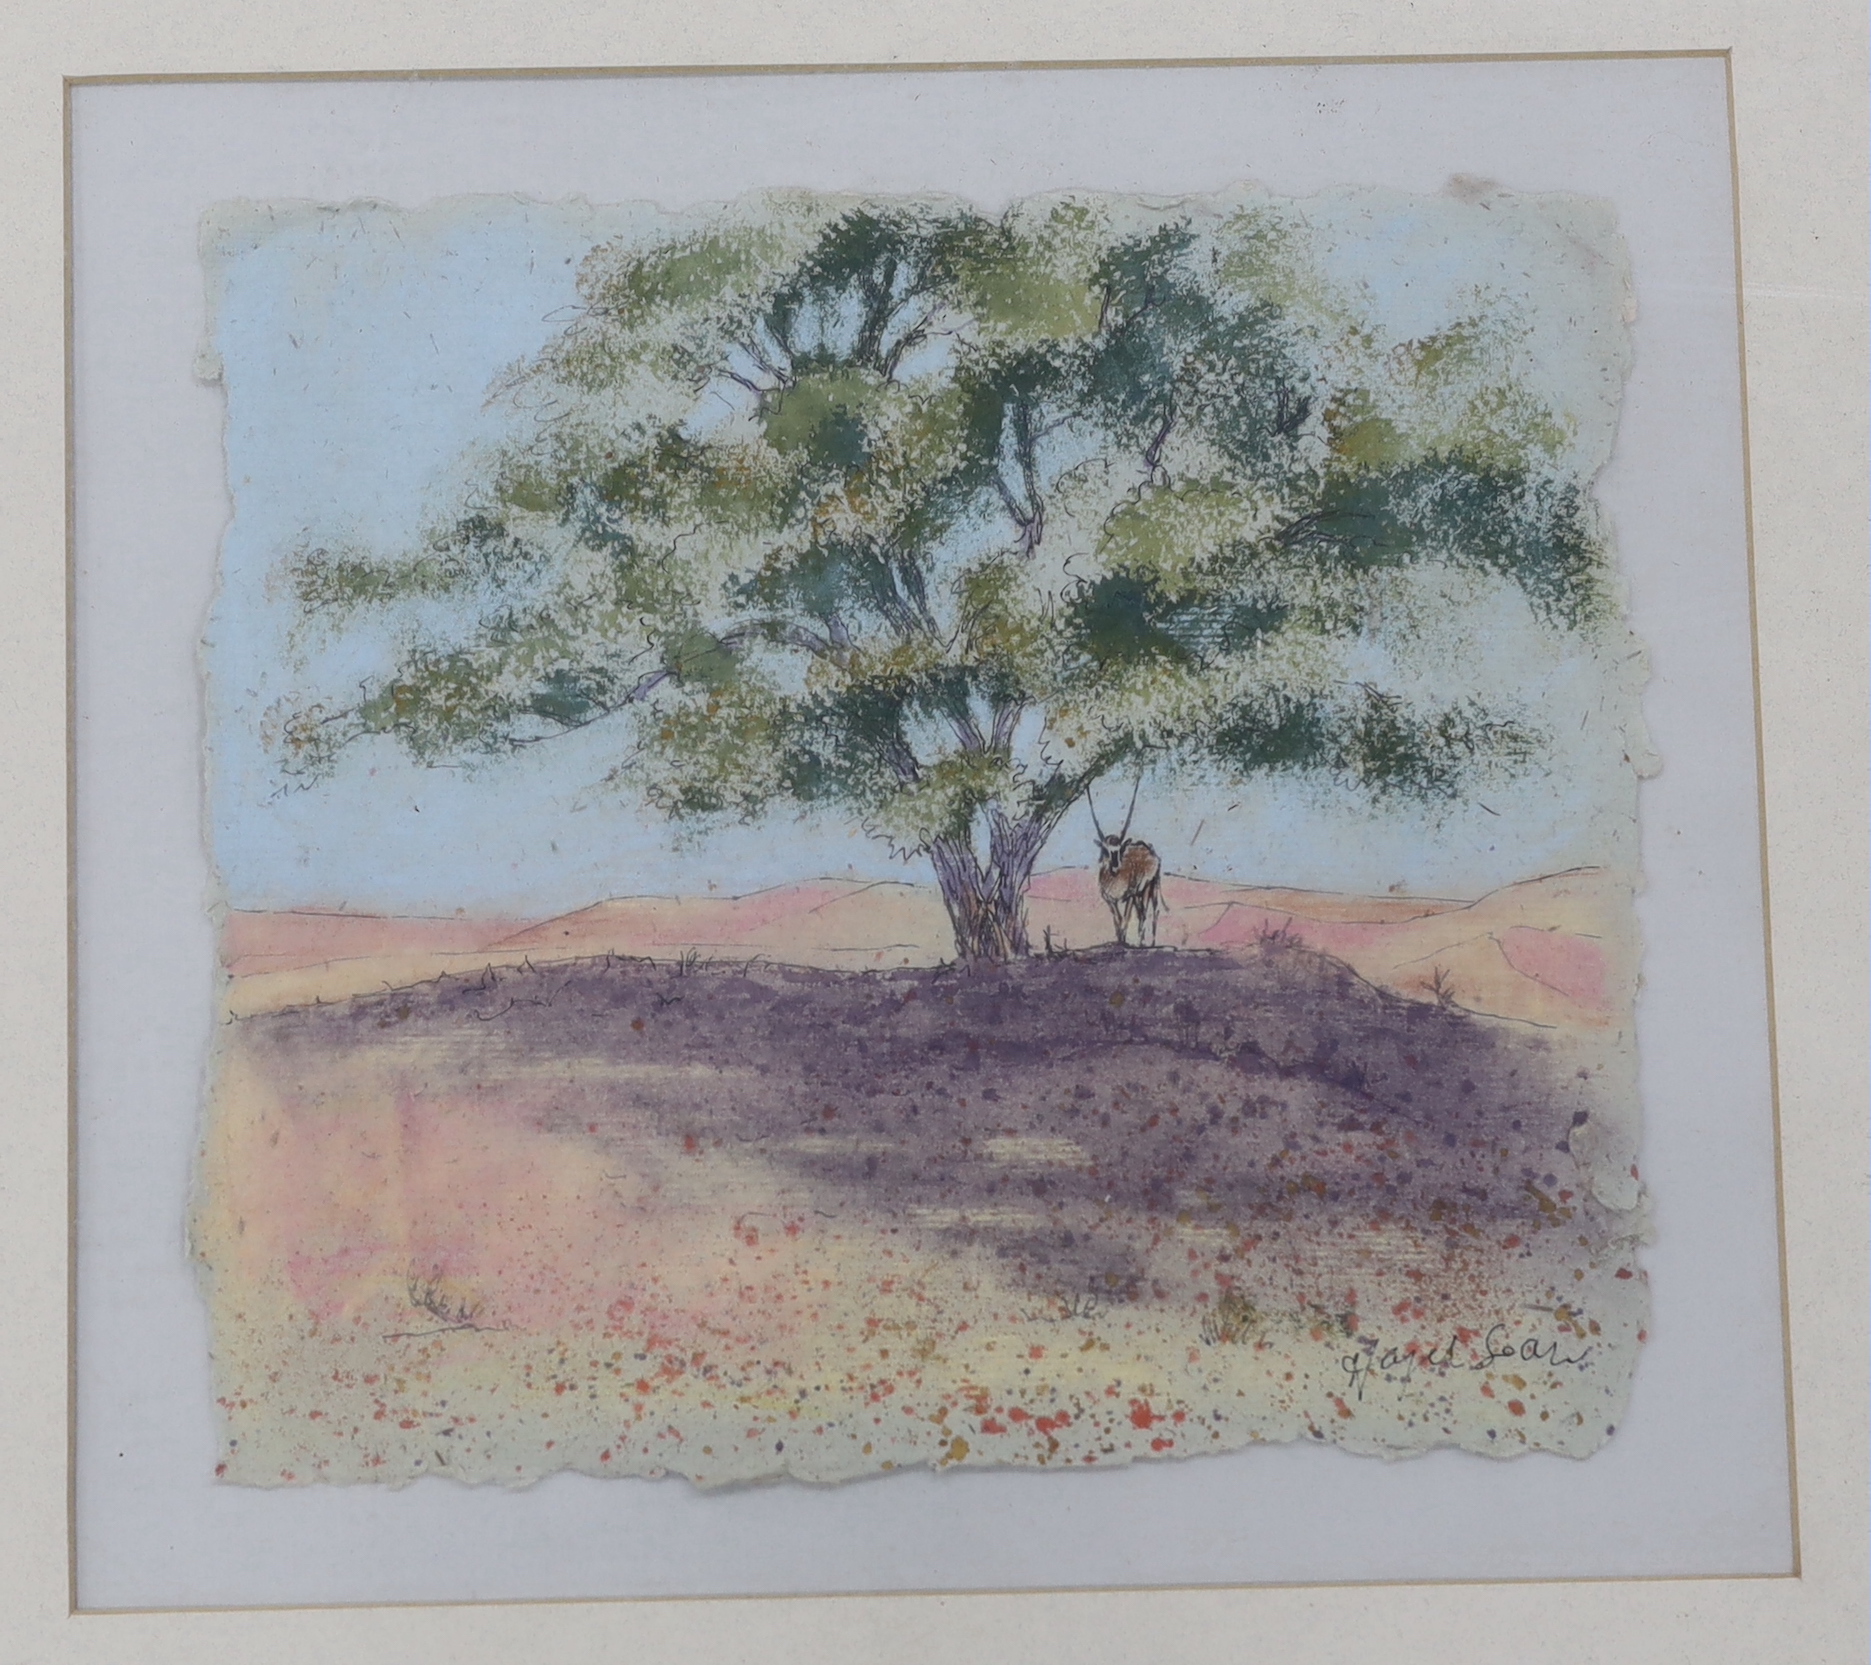 Hazel Soan, watercolour and pastel, African landscapes, 21 x 22cm, framed as one